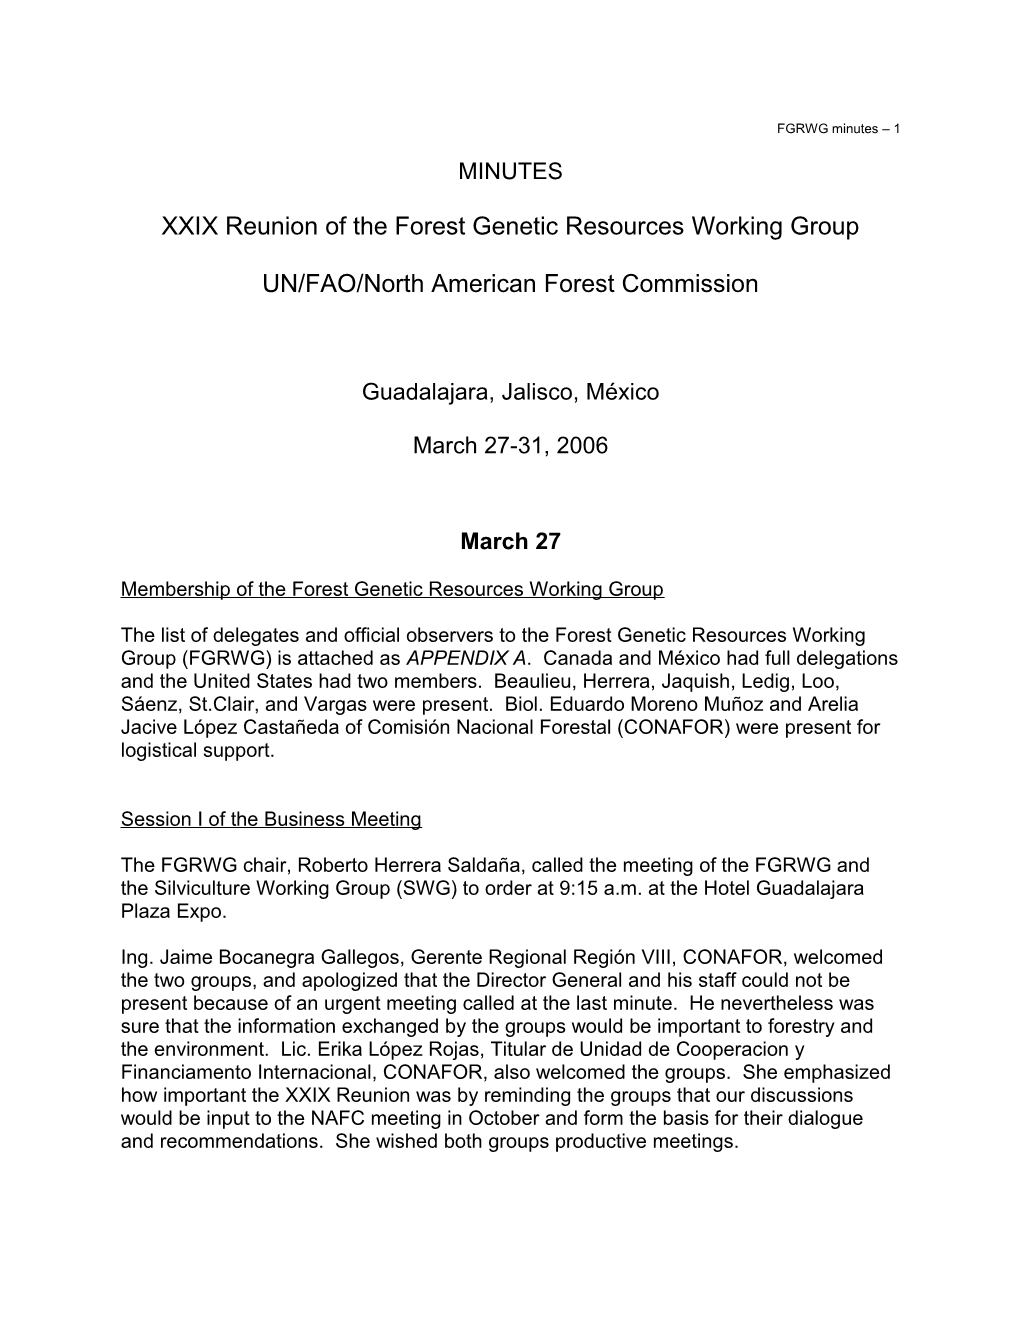 XXIX Reunion of the Forest Genetic Resources Working Group